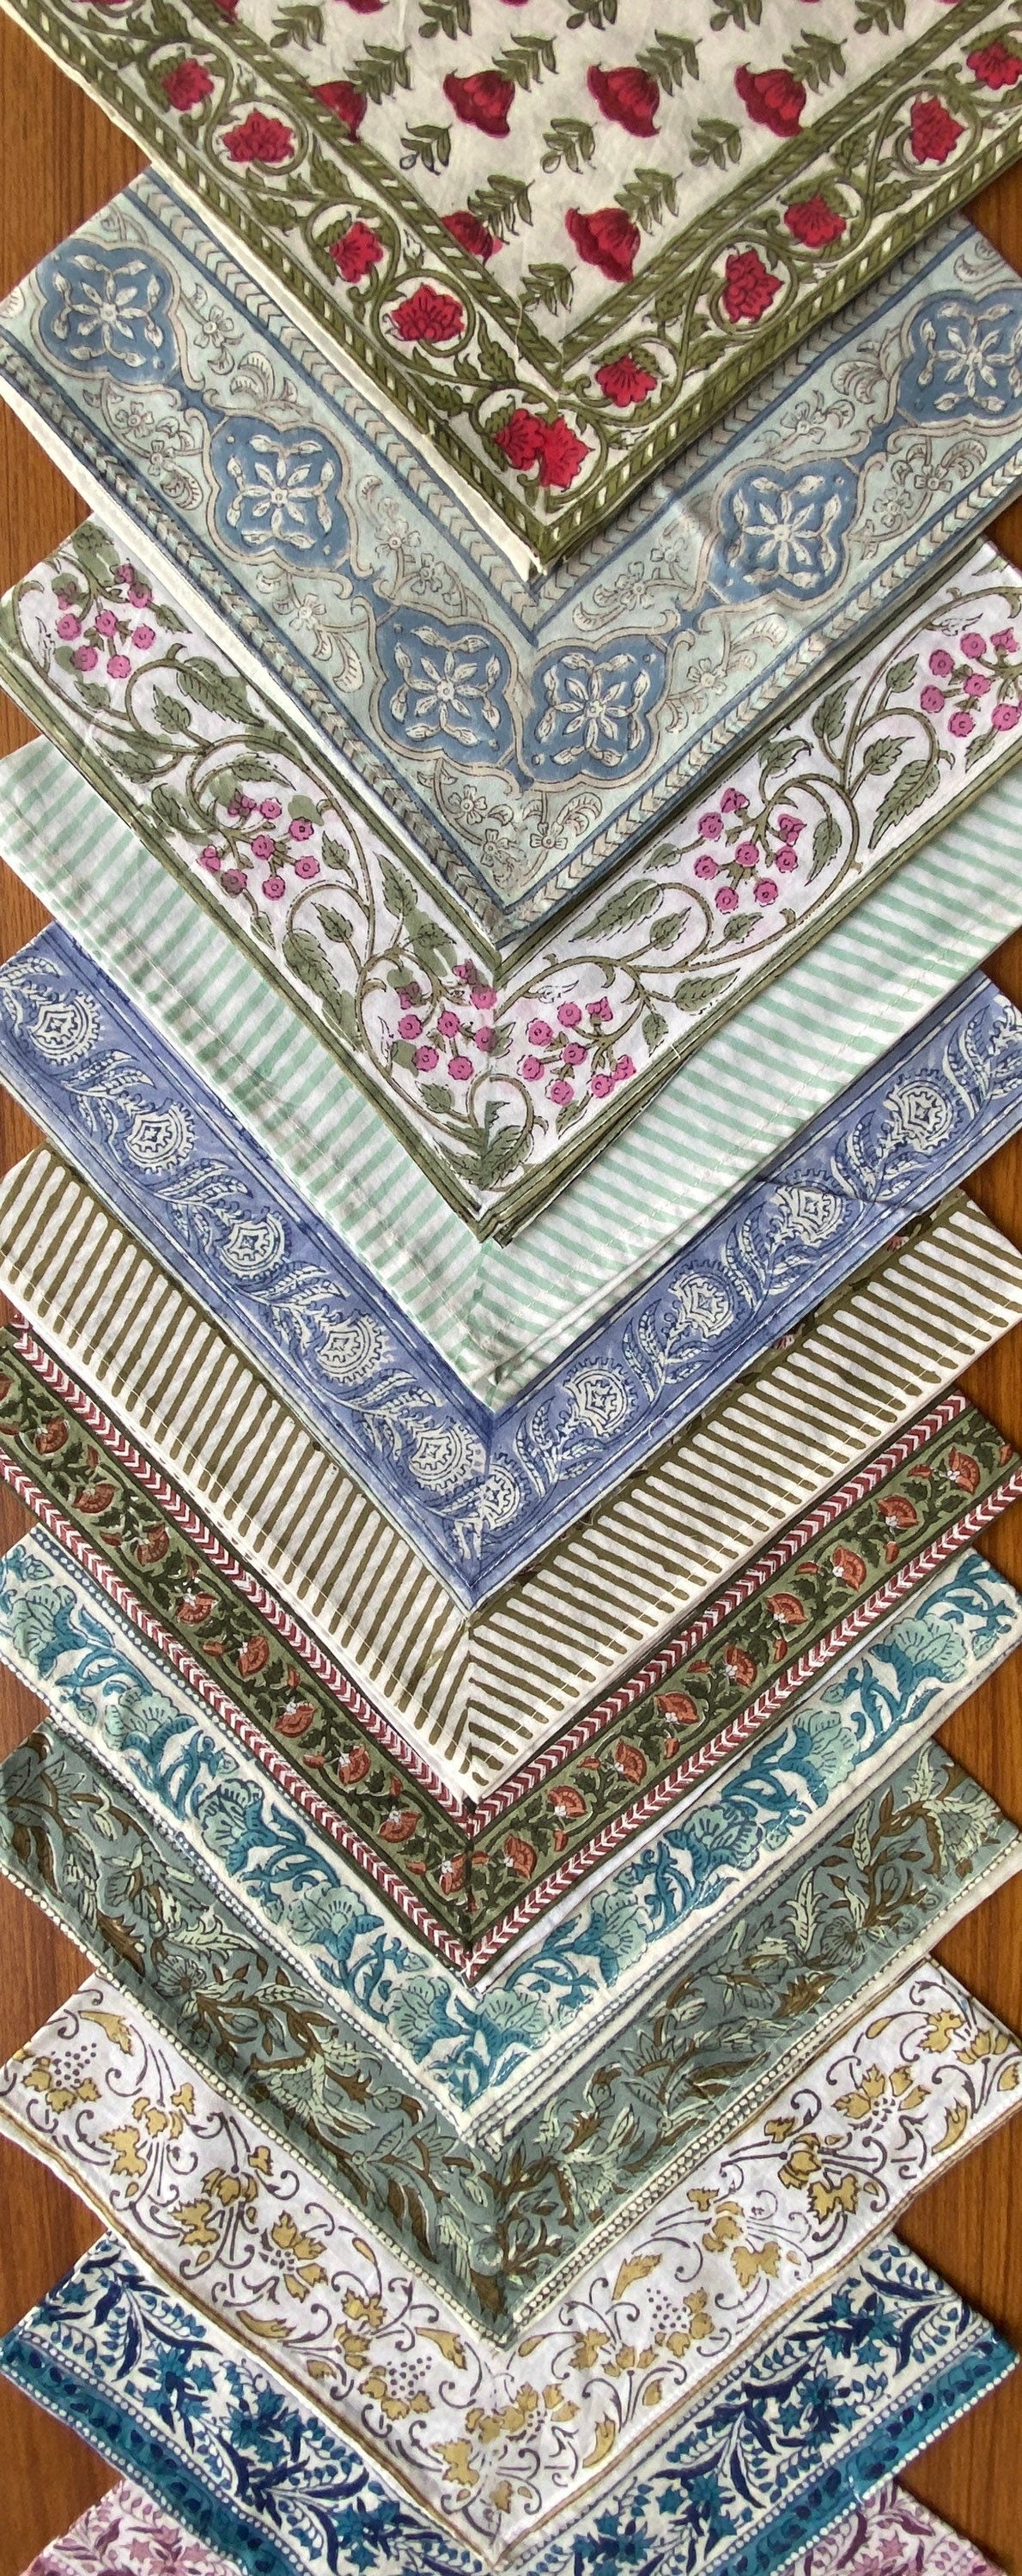 Mix and Match BOHO Indian Hand Block Printed Cotton Cloth Dinner Napkins Set of 4,6,12,24,48, Size- 20x20", Wedding, Party Decor, Home Decor, Room Decor, Birthday, Anniversary, Baby Shower, Farmhouse, Wedding Party, Garden Outdoor Patio